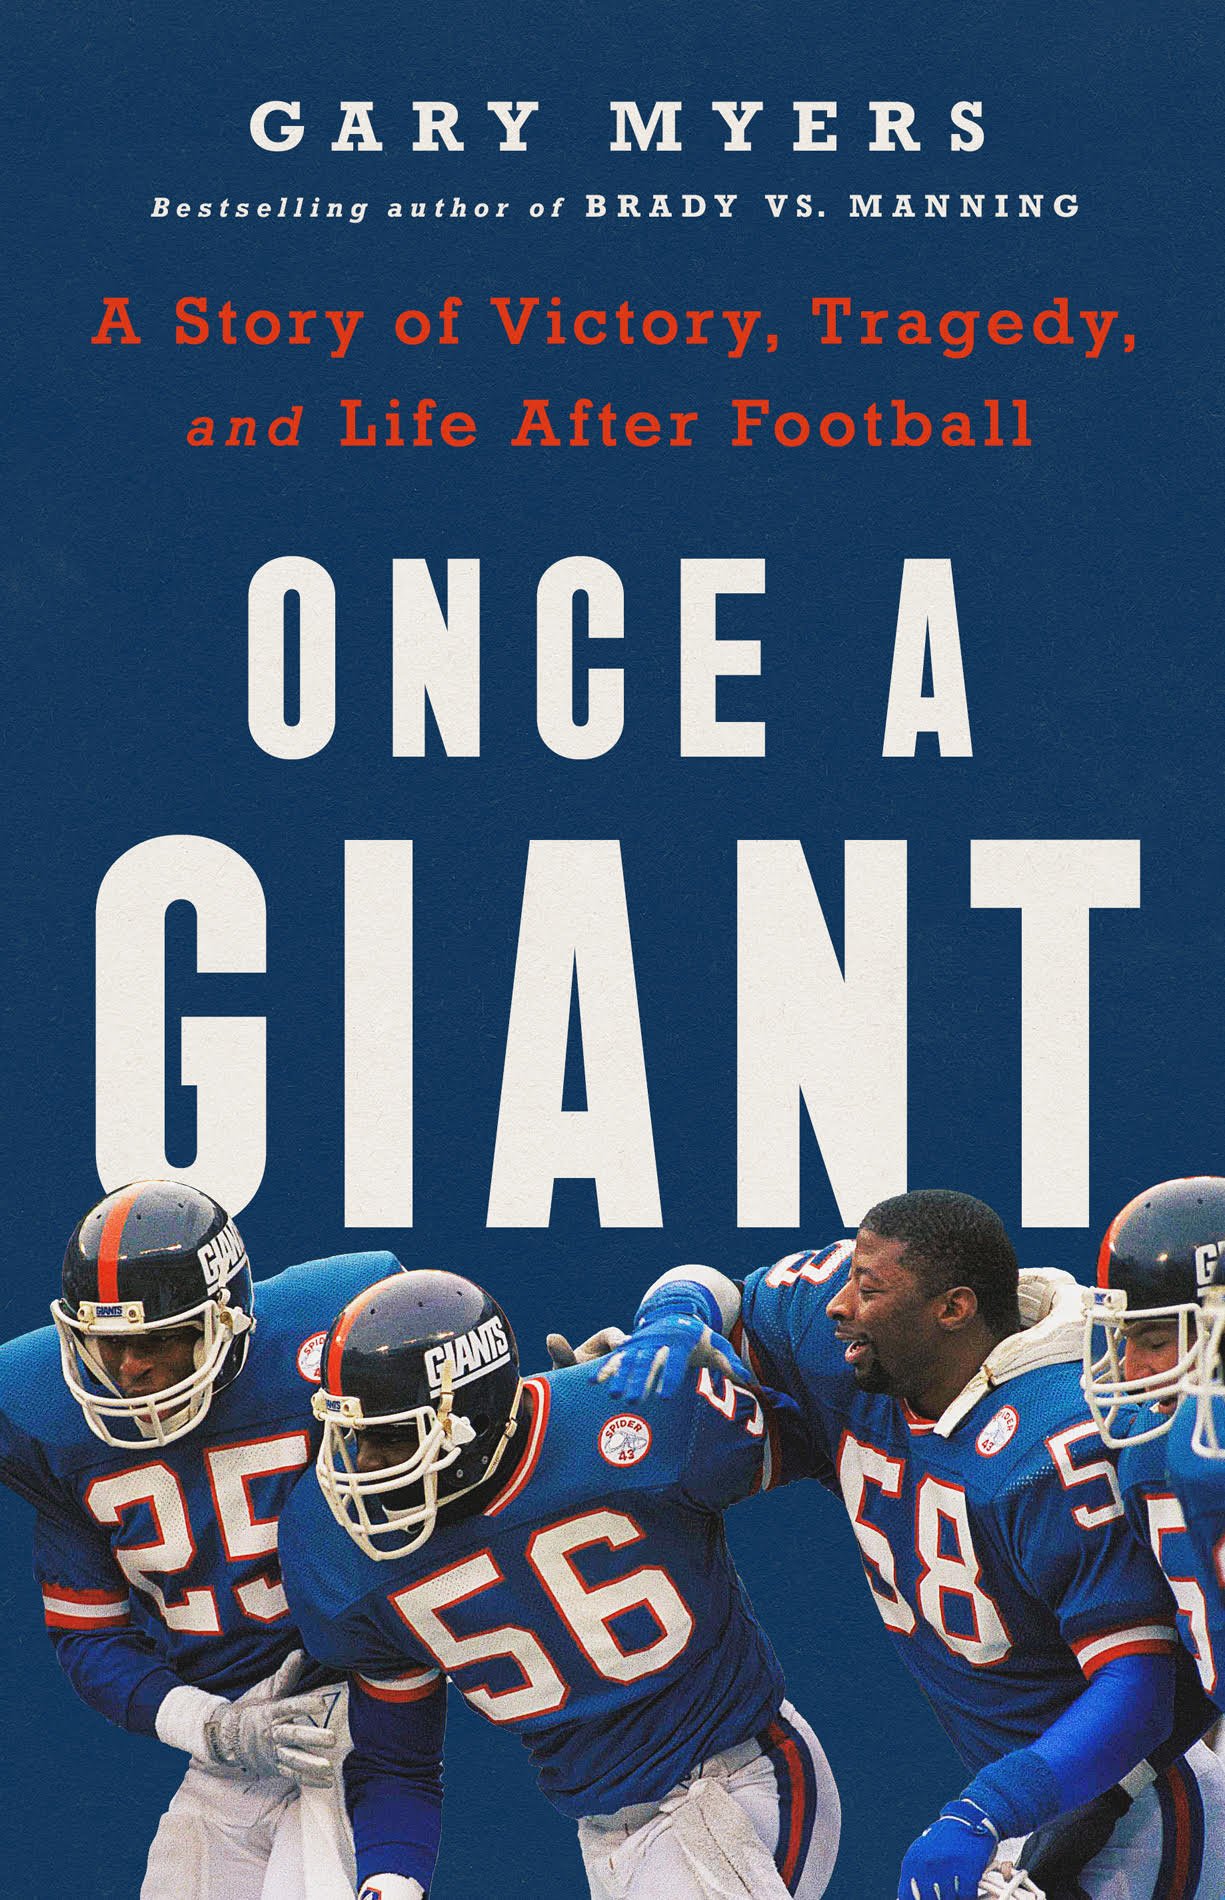 Once a Giant by Gary Myers